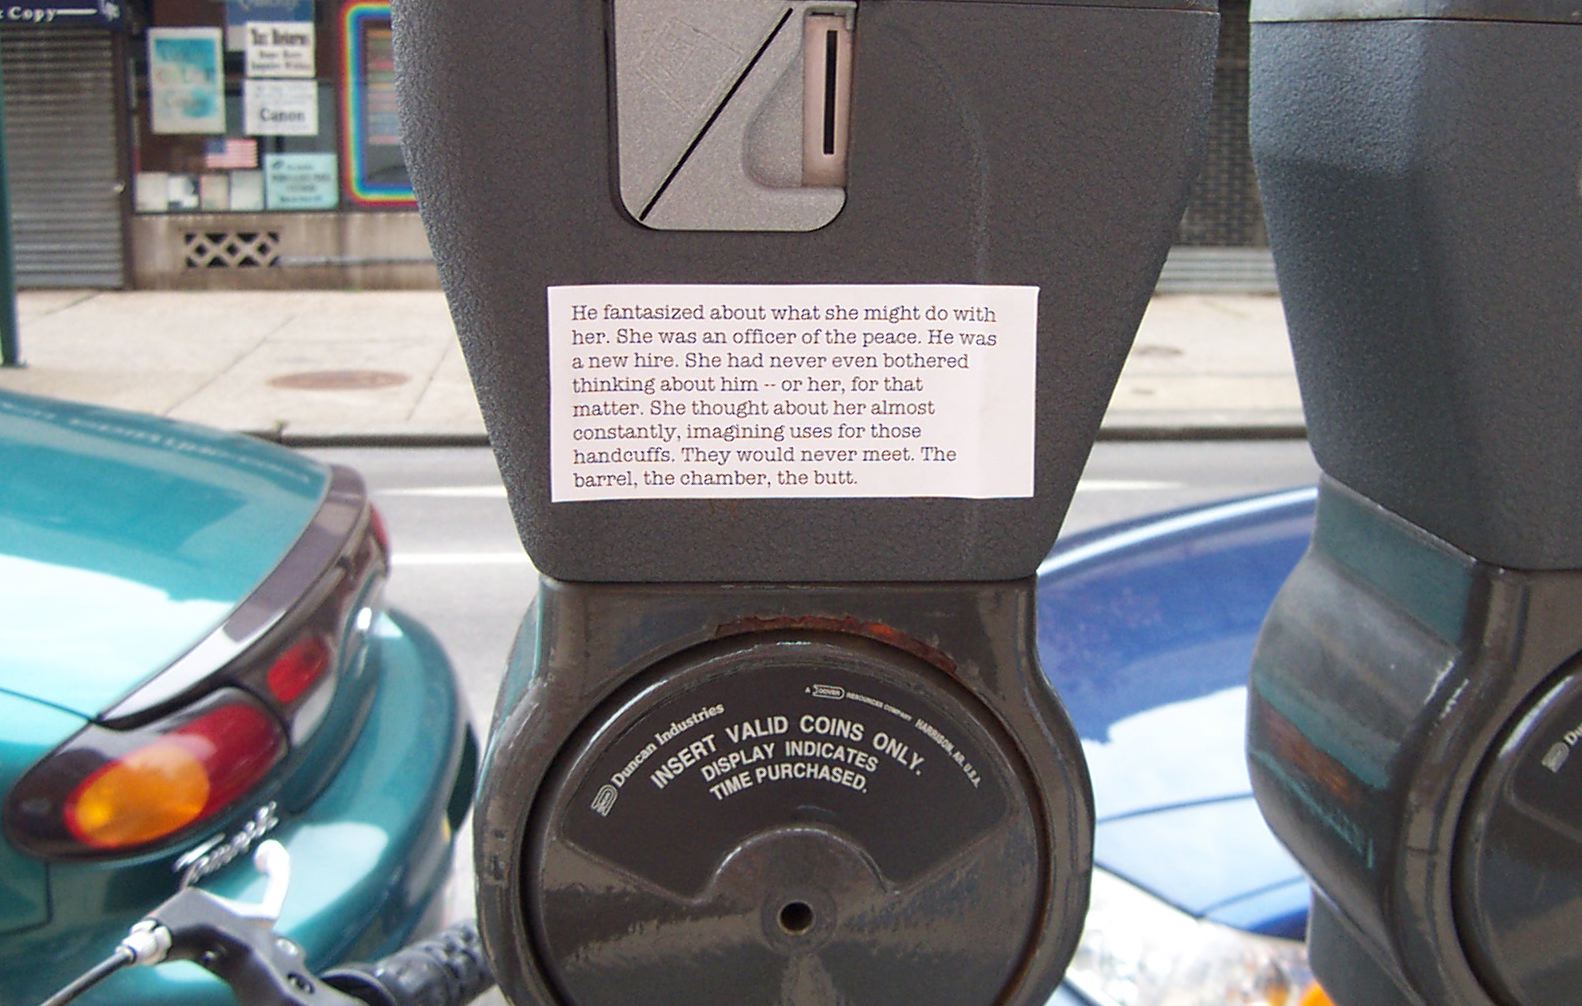 Sticker on parking meter: He fantasized about what she might do with her ...